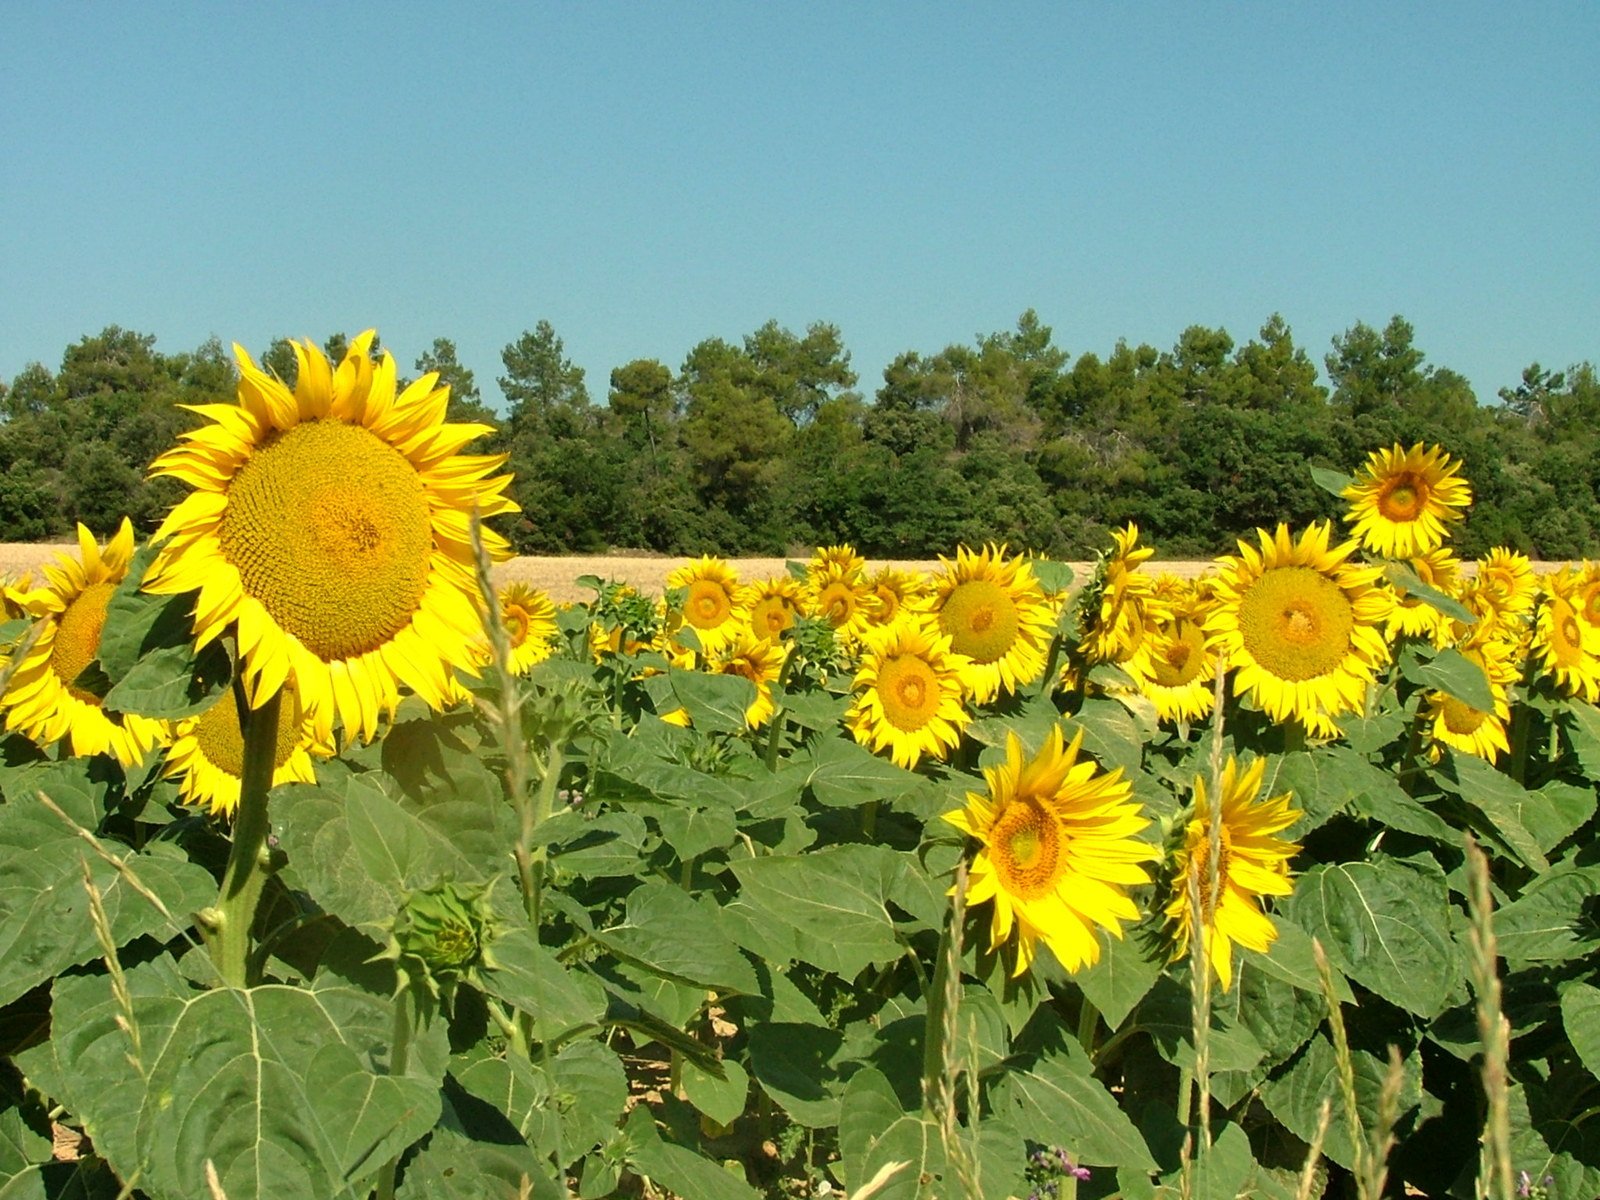 a field of yellow sunflowers in a rural setting